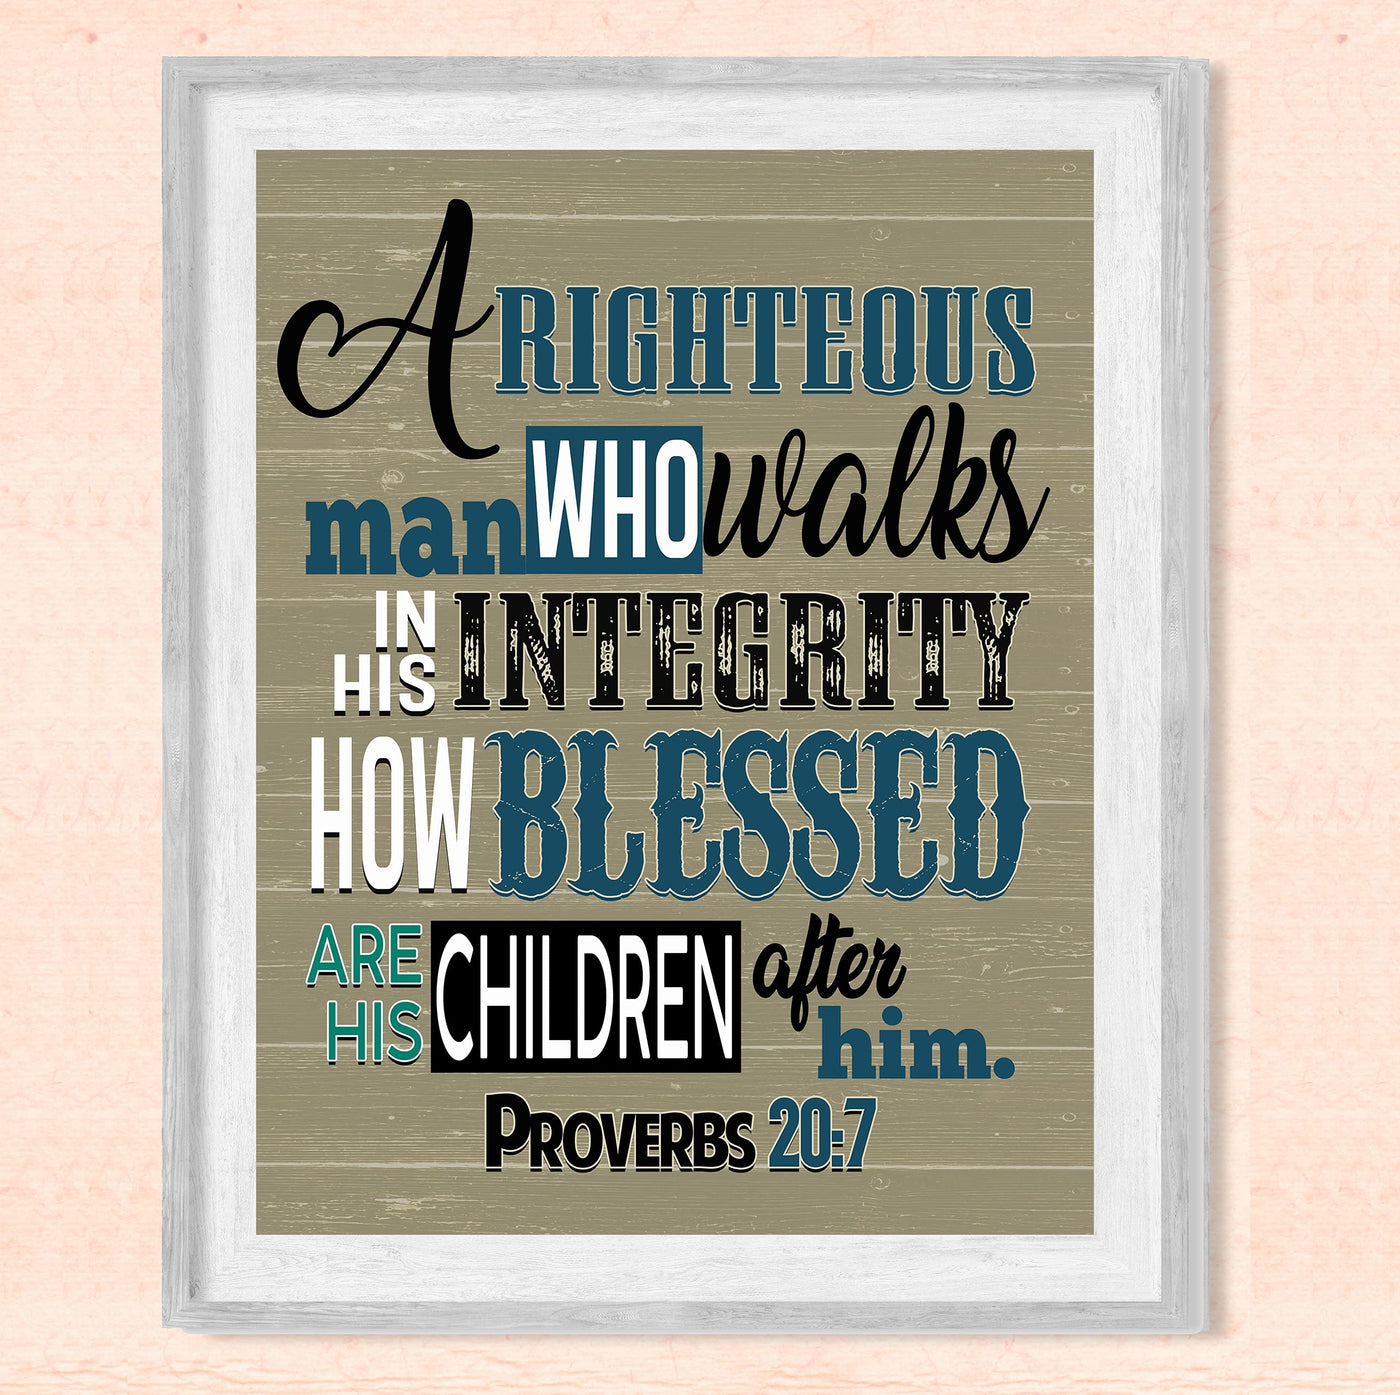 A Righteous Man Who Walks In His Integrity- Proverbs 20:7- Bible Verse Wall Art- 8x10"- Rustic Scripture Wall Print- Ready to Frame. Home - Office Decor. Perfect Christian Gift & Reminder of Faith.